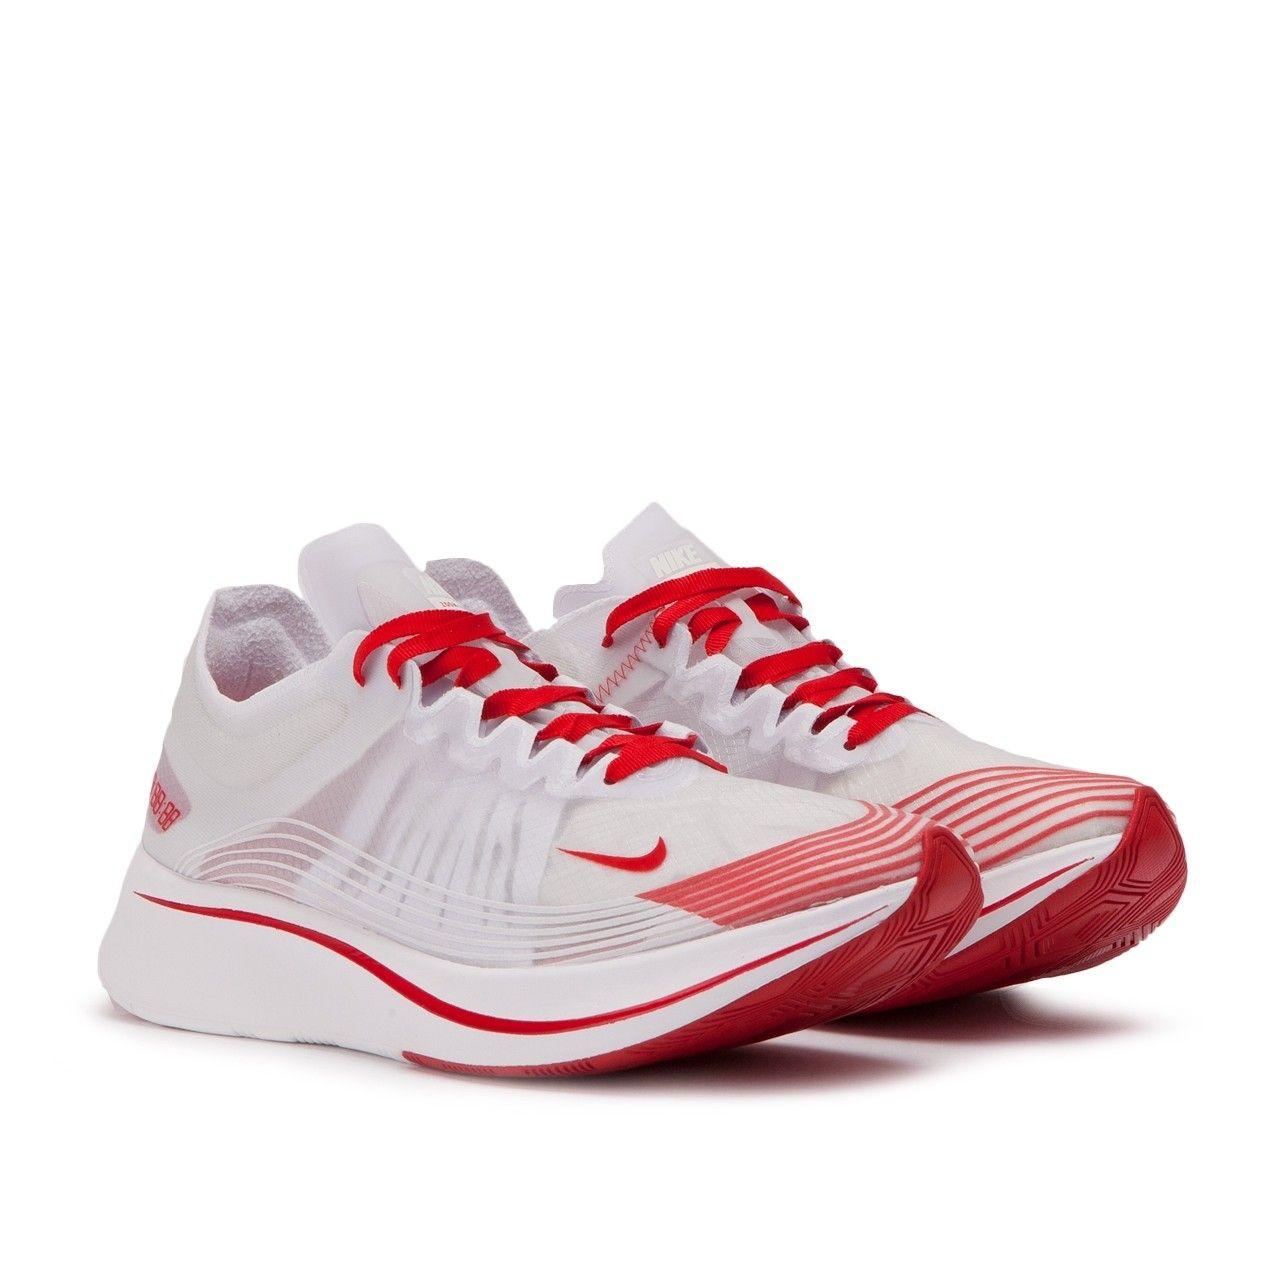 White with Red Sp Logo - Nike Zoom Fly SP (White / Red) AJ9282 100